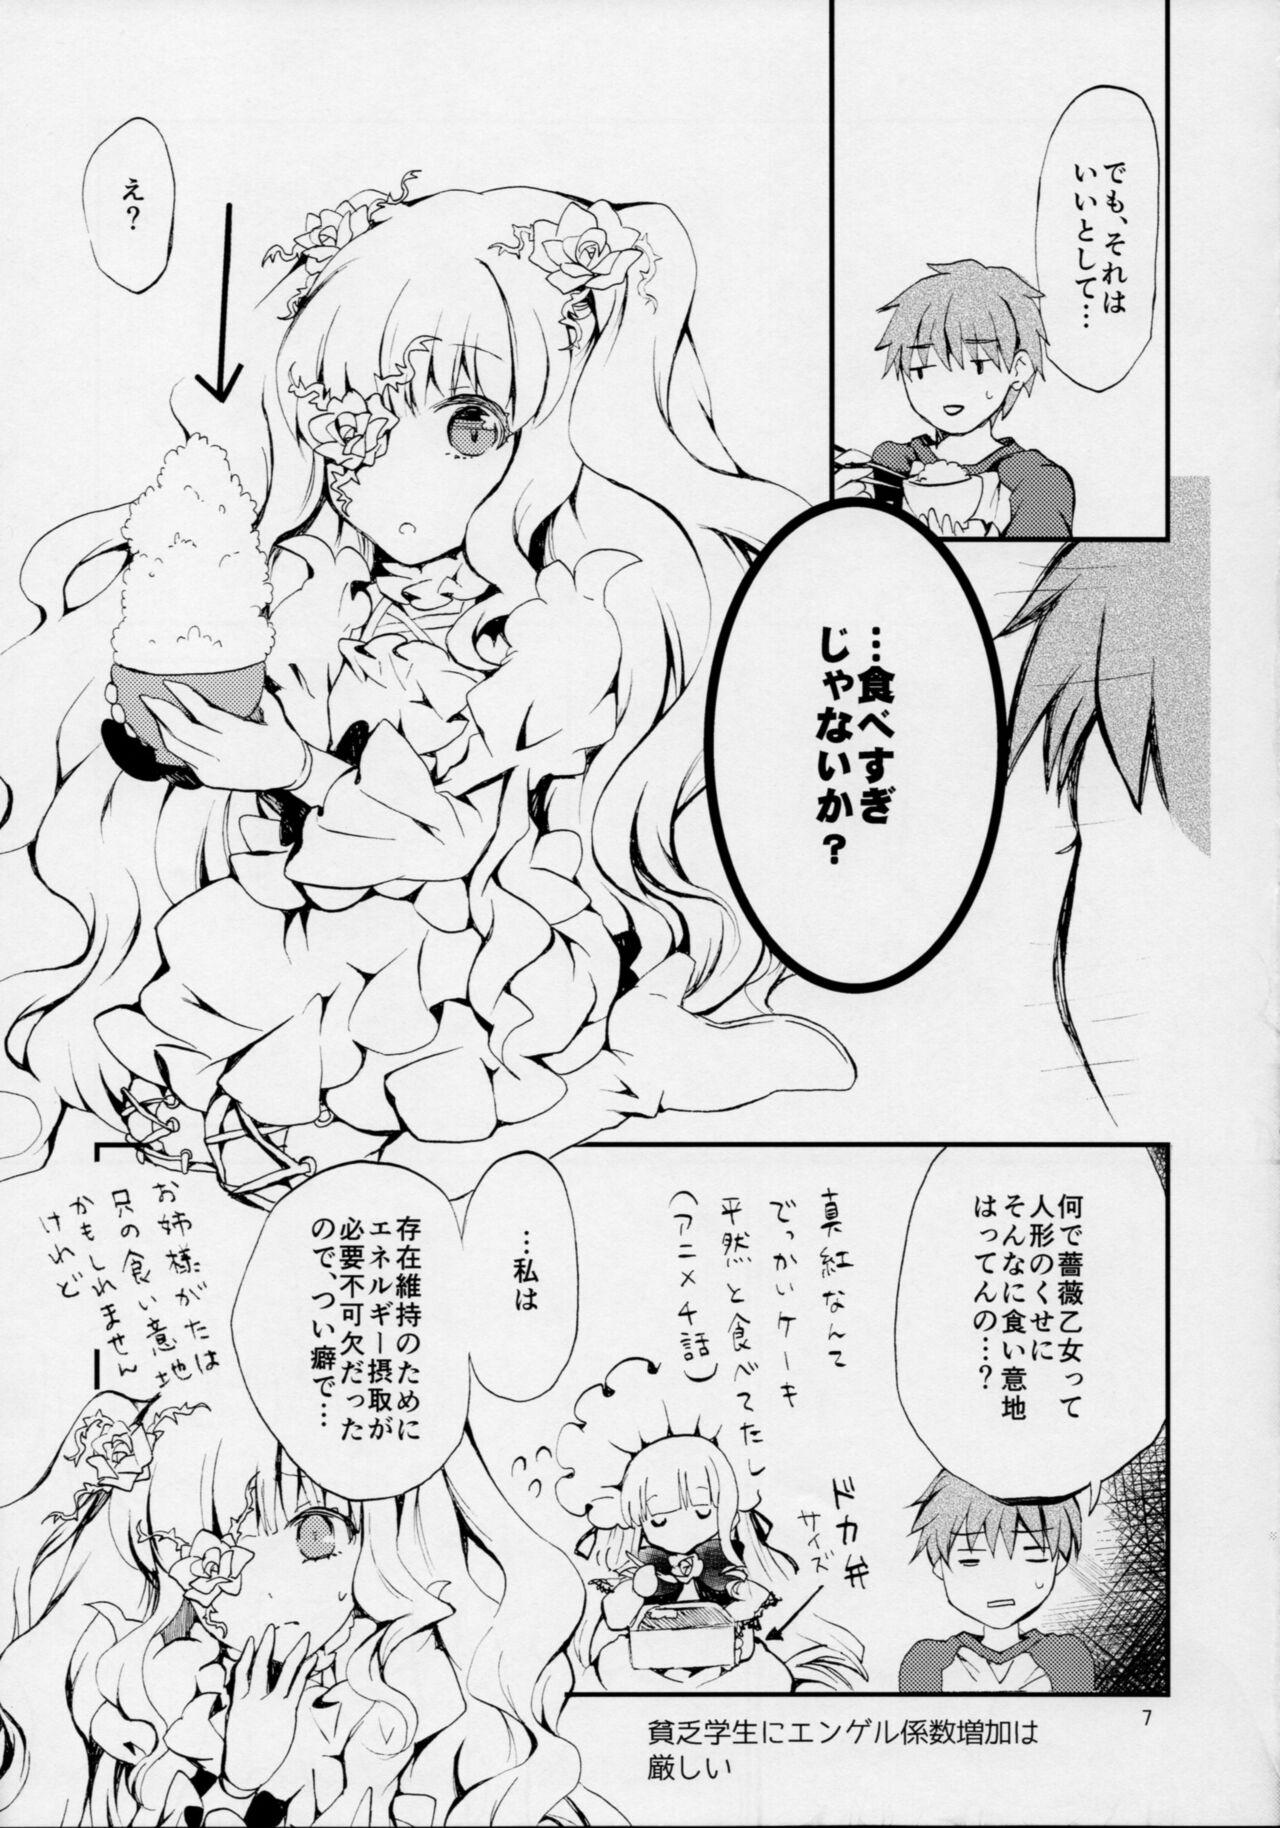 Club Eat me, Drink me - Rozen maiden Glamour Porn - Page 4